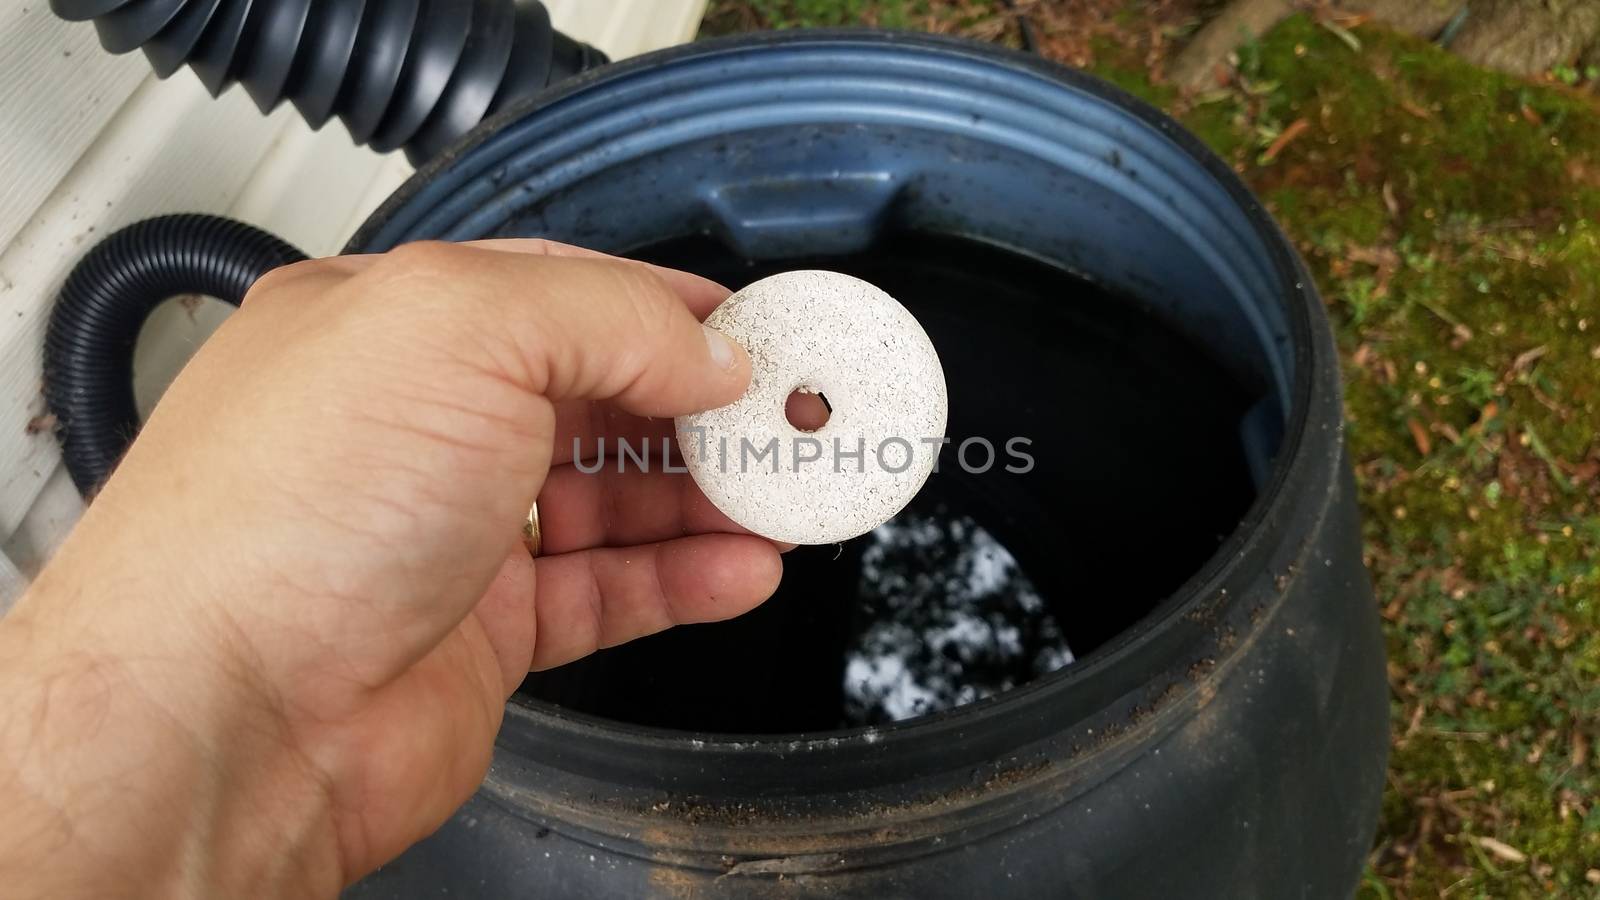 hand holding mosquito tablet insecticide over rain barrel by stockphotofan1